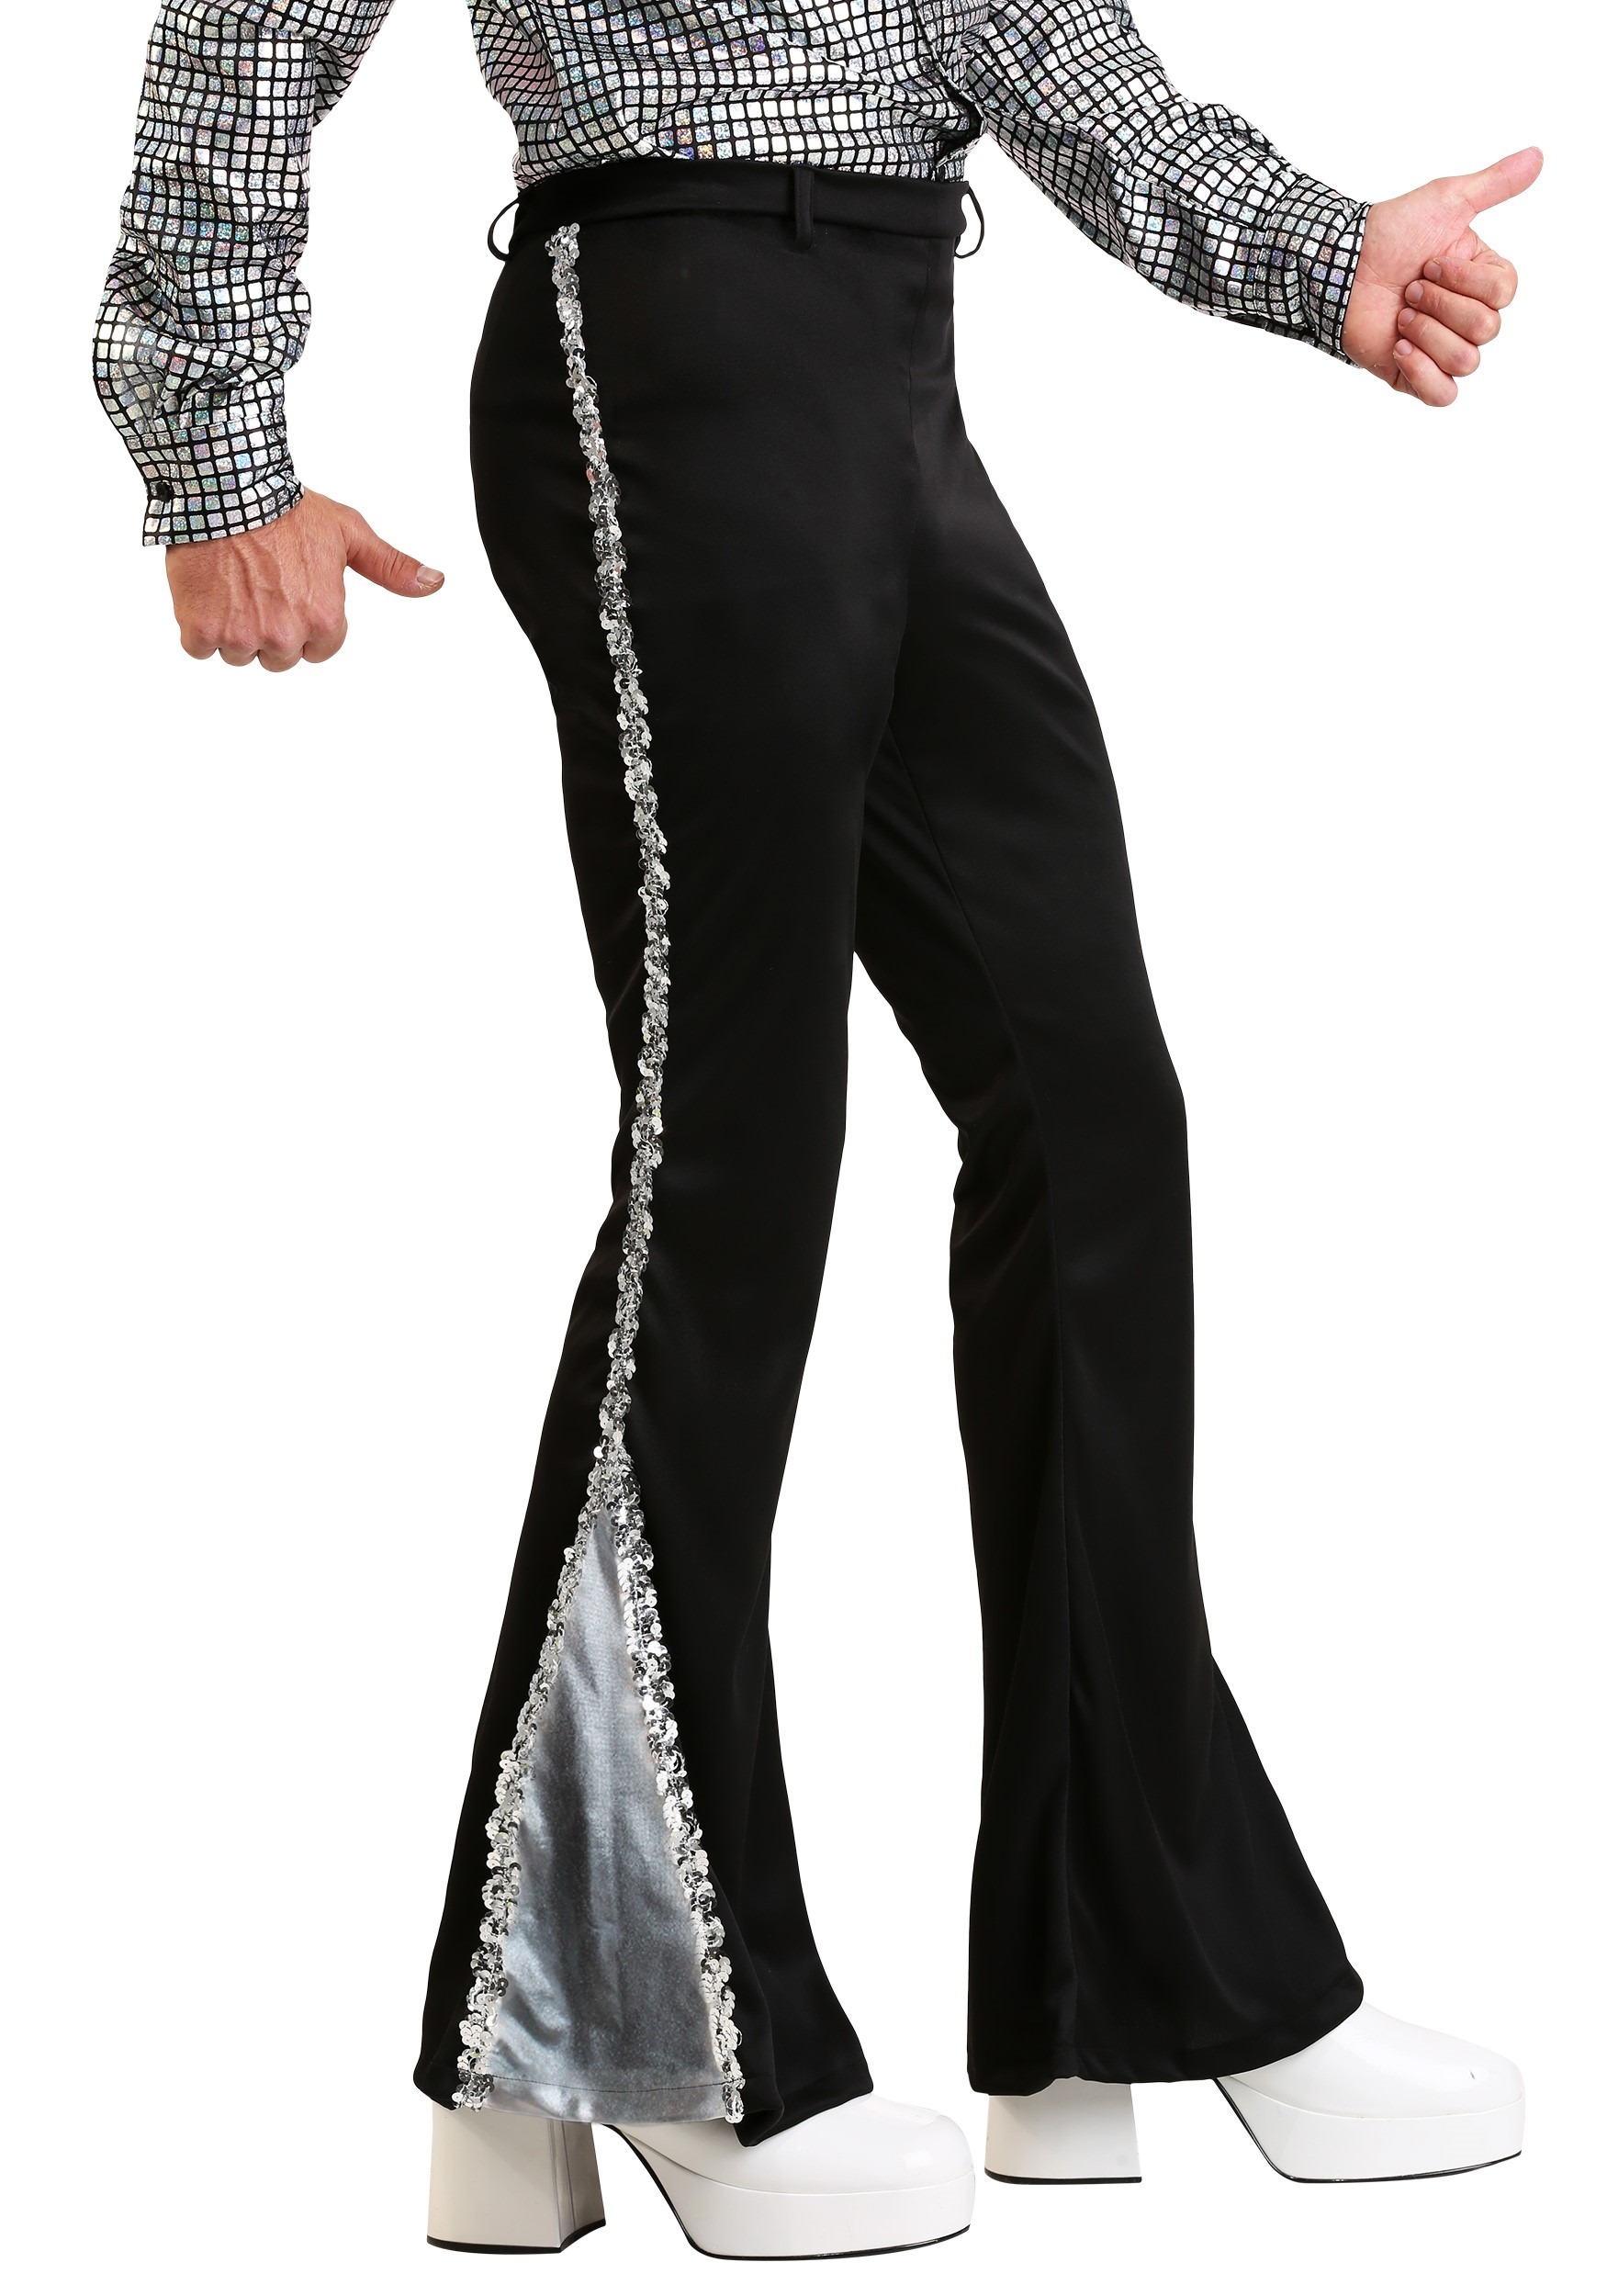 https://images.halloweencostumes.eu/products/51535/1-1/mens-silver-sequin-disco-pants.jpg